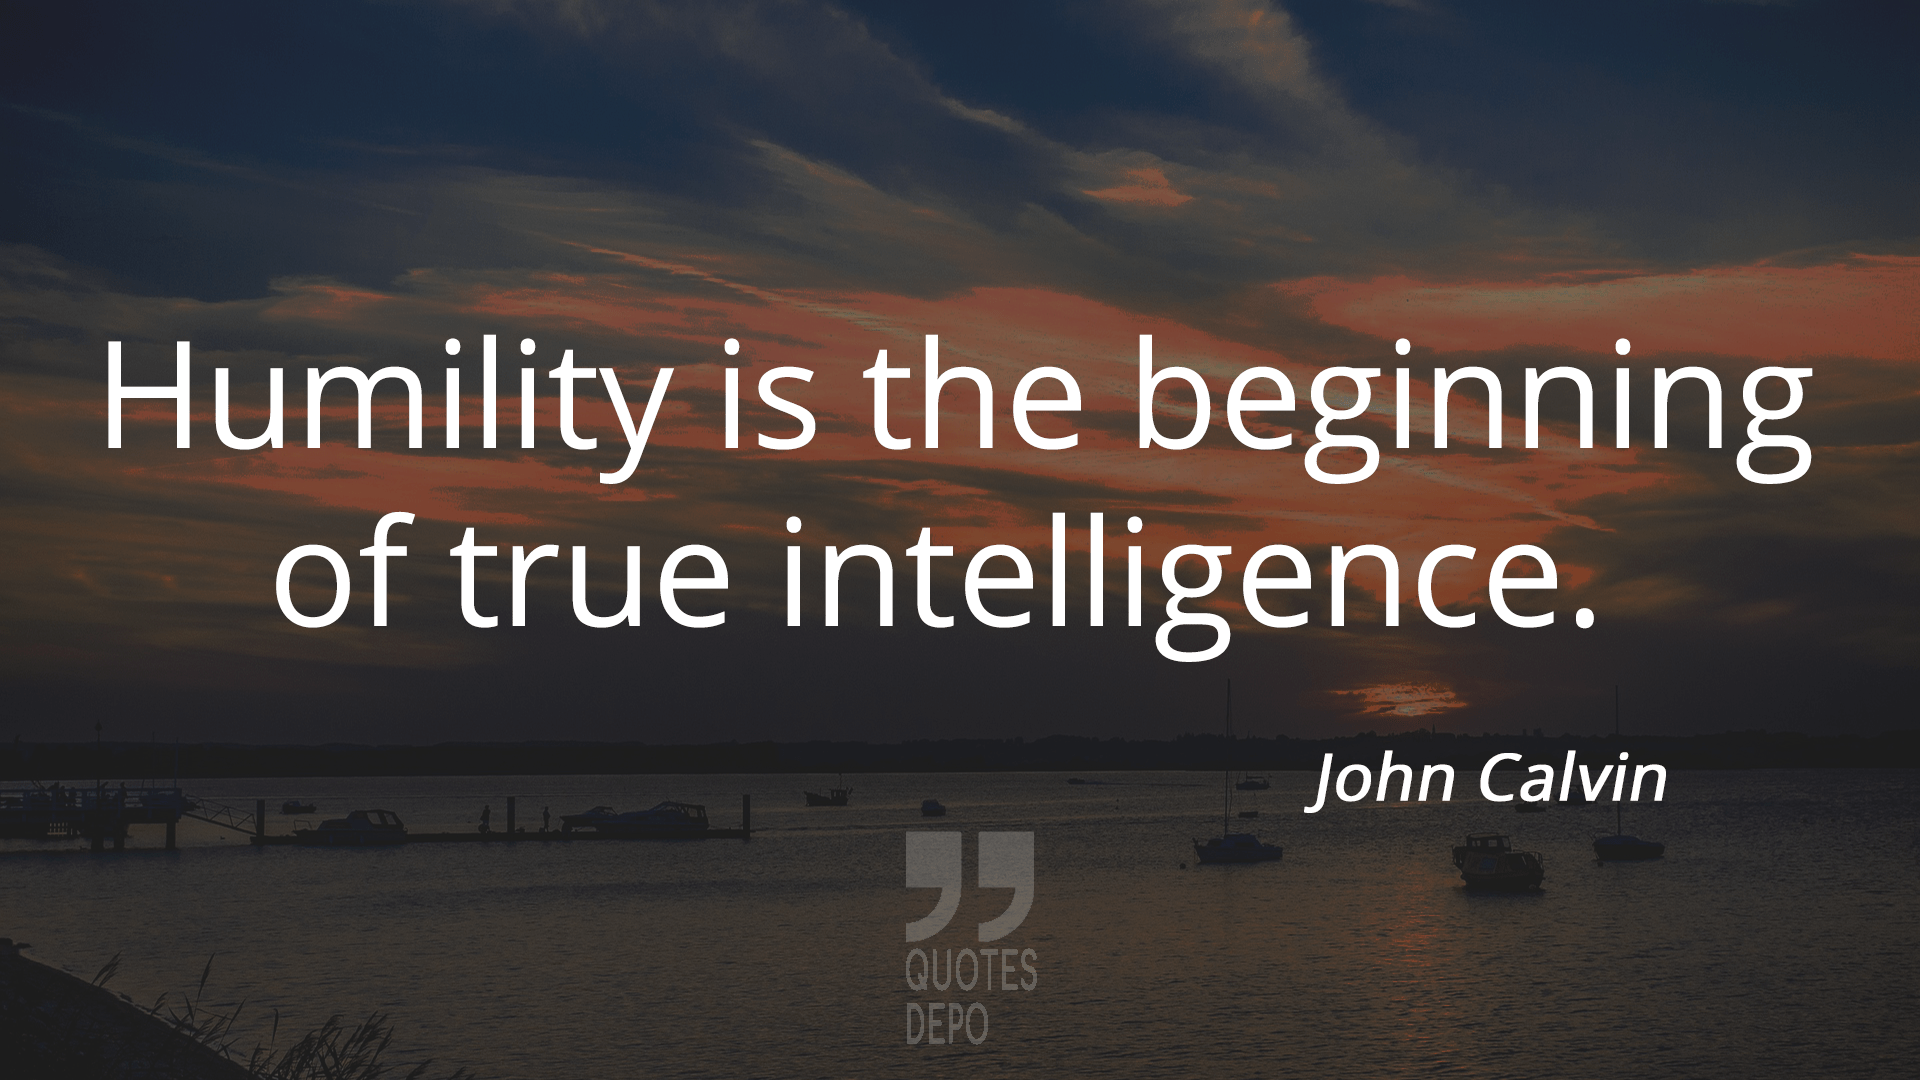 humility is the beginning of true intelligence - john calvin quotes